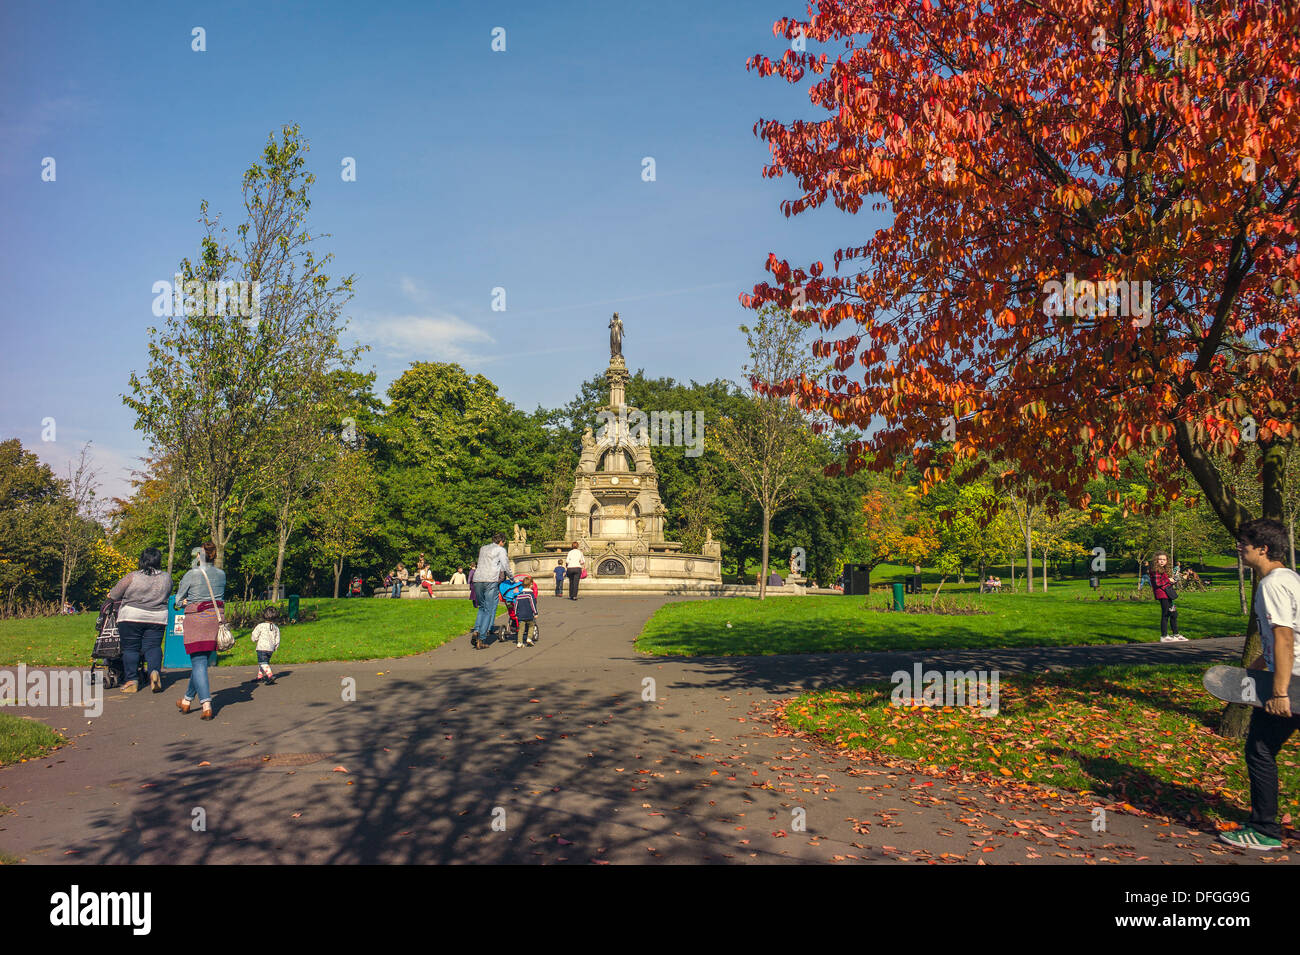 The Stewart memorial fountain is located within the Kelvingrove Park Glasgow and is shown with an autumn tinged tree background Stock Photo